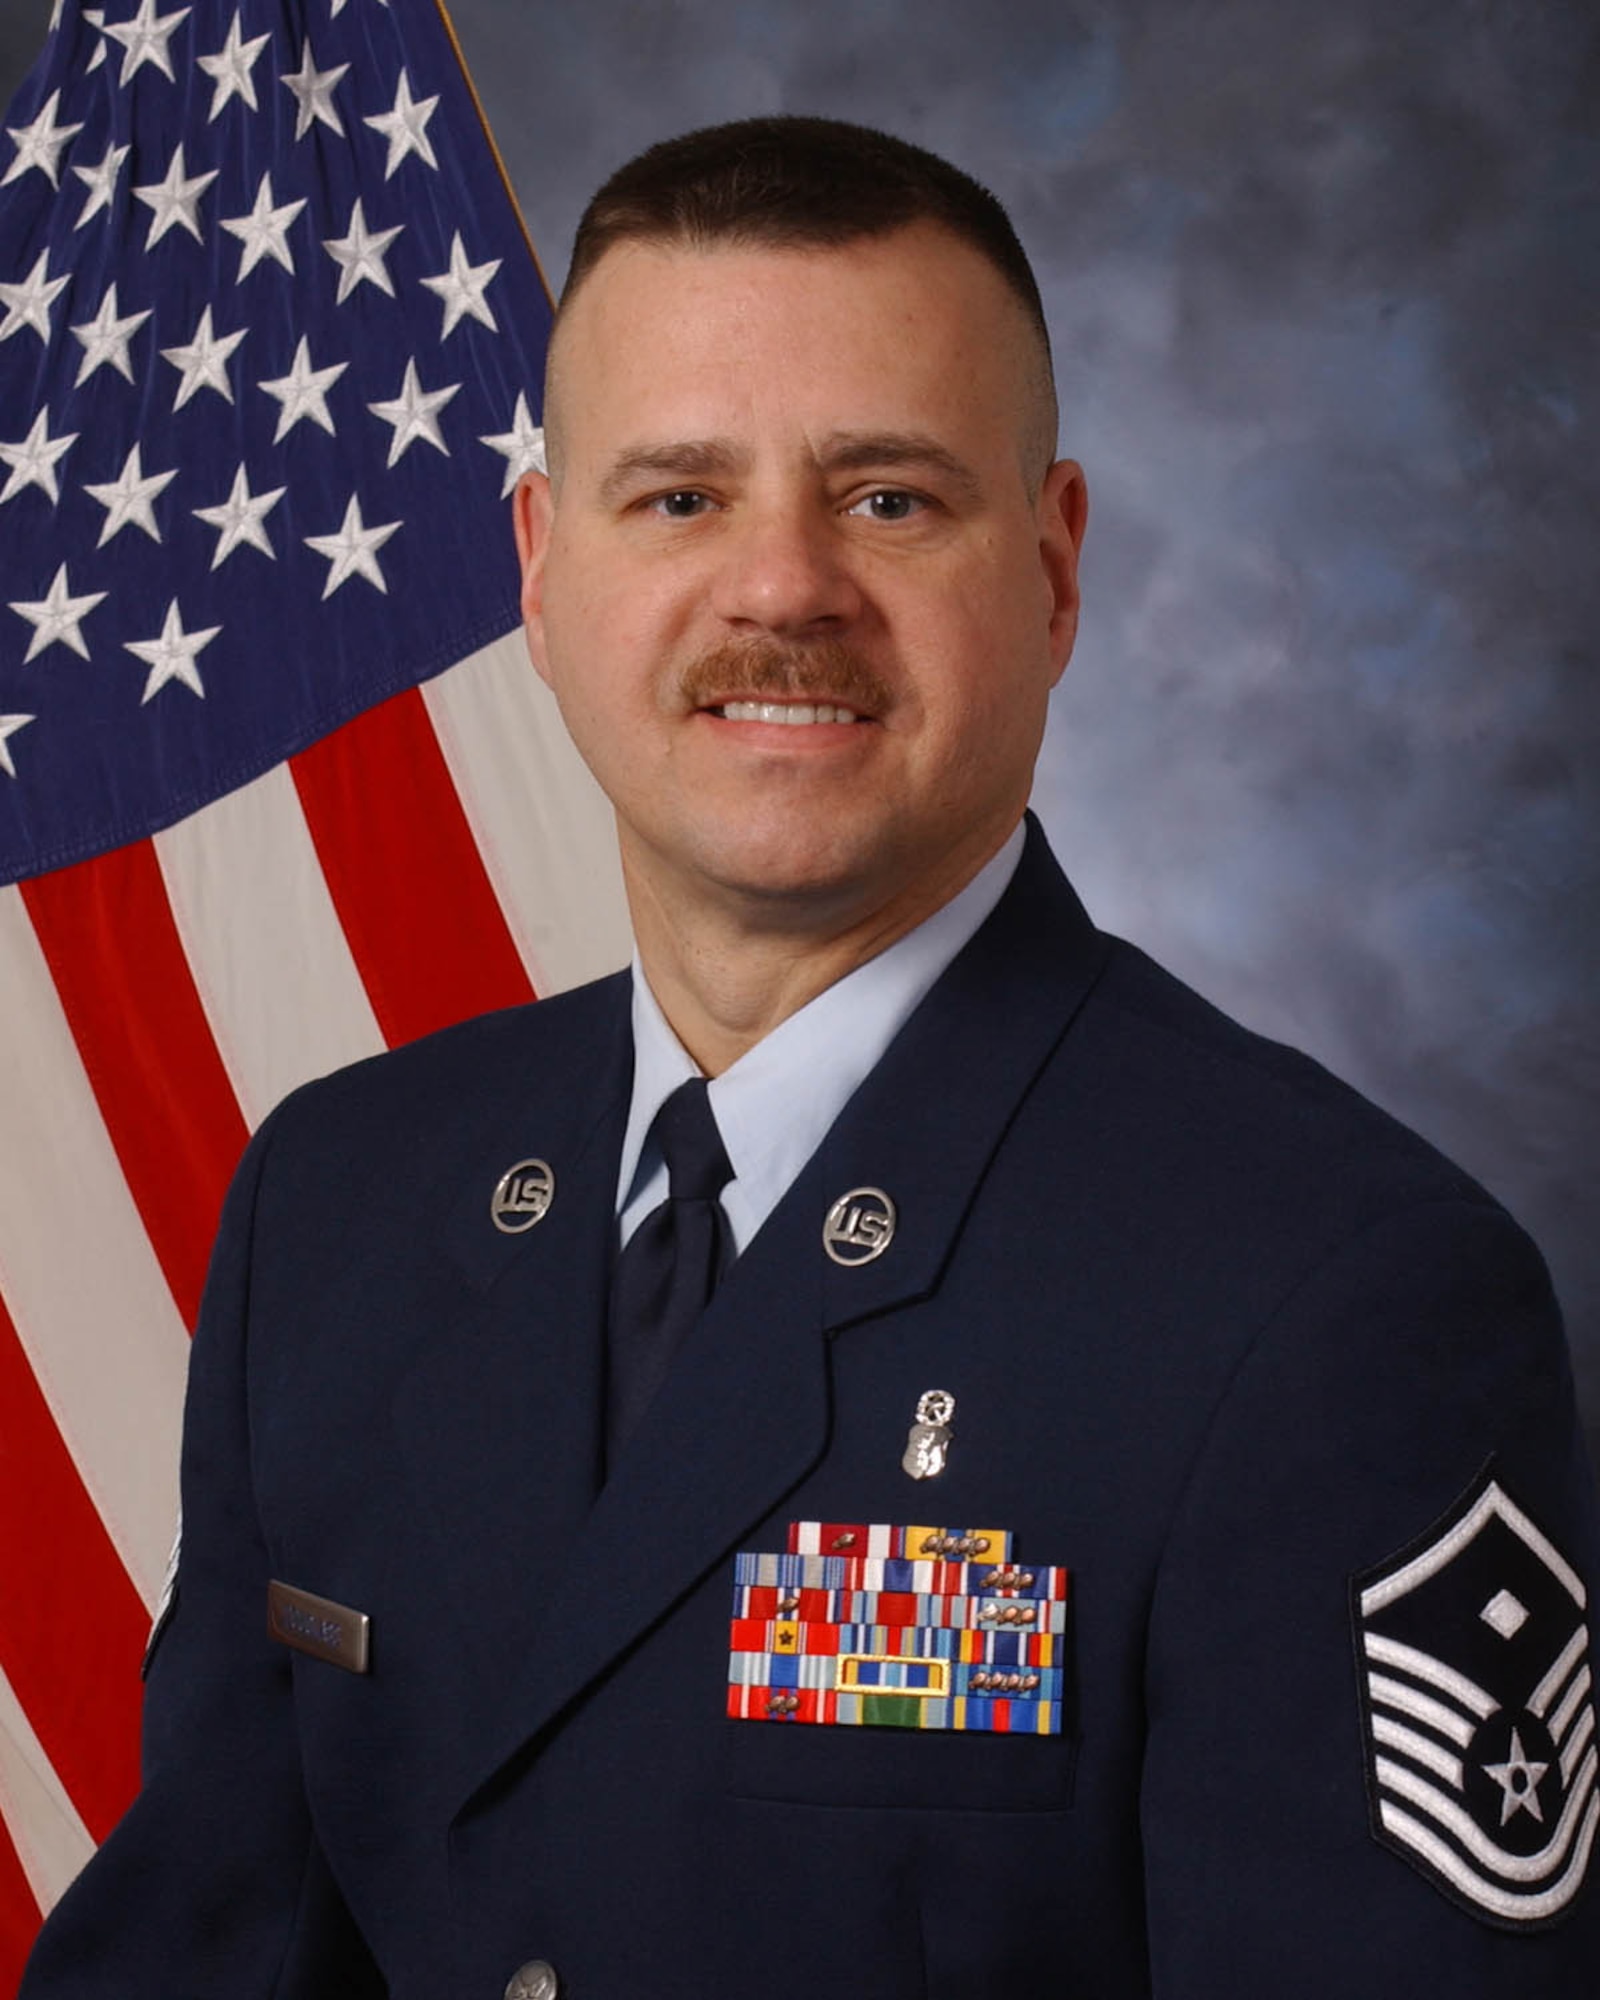 Master Sgt. Glenn Douglass, the first sergeant for the 352nd Maintenance Squadron at RAF Mildenhall, U.K., is the 2007 Air Force Special Operations Command First Sergeant of the Year. (U.S. Air Force photo)